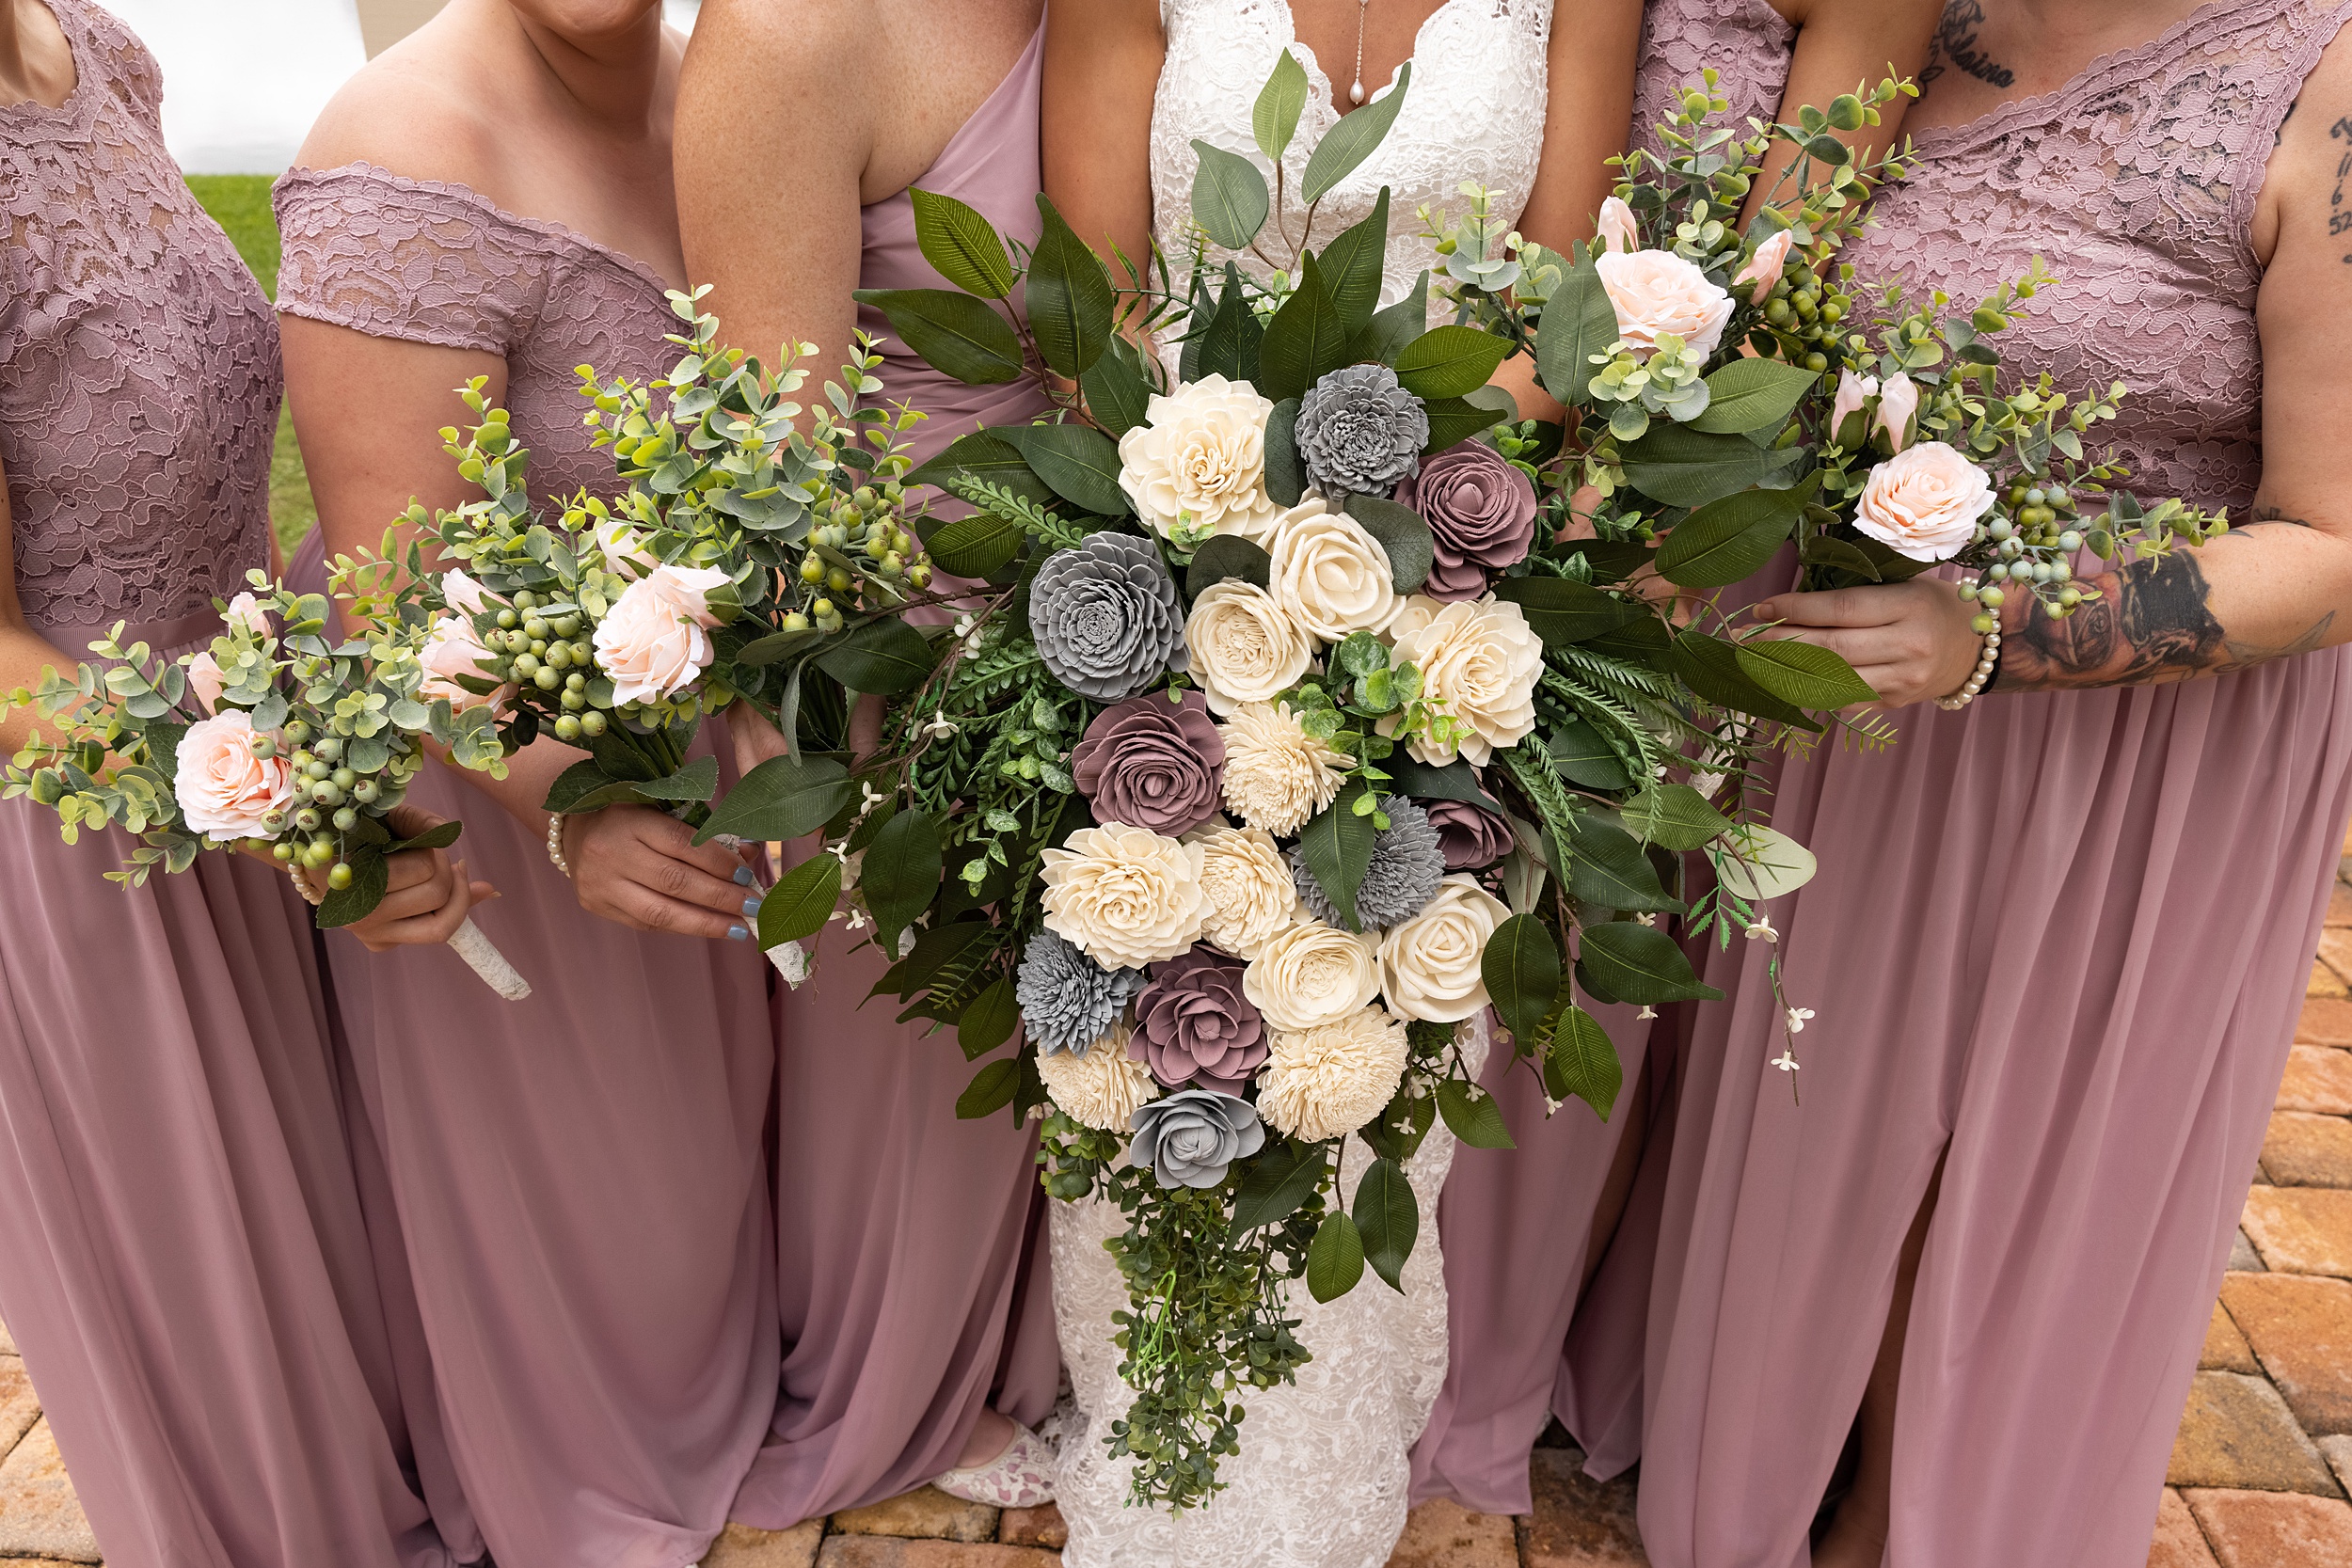 Details of a bride's bouquet with purple, white and blue flowers